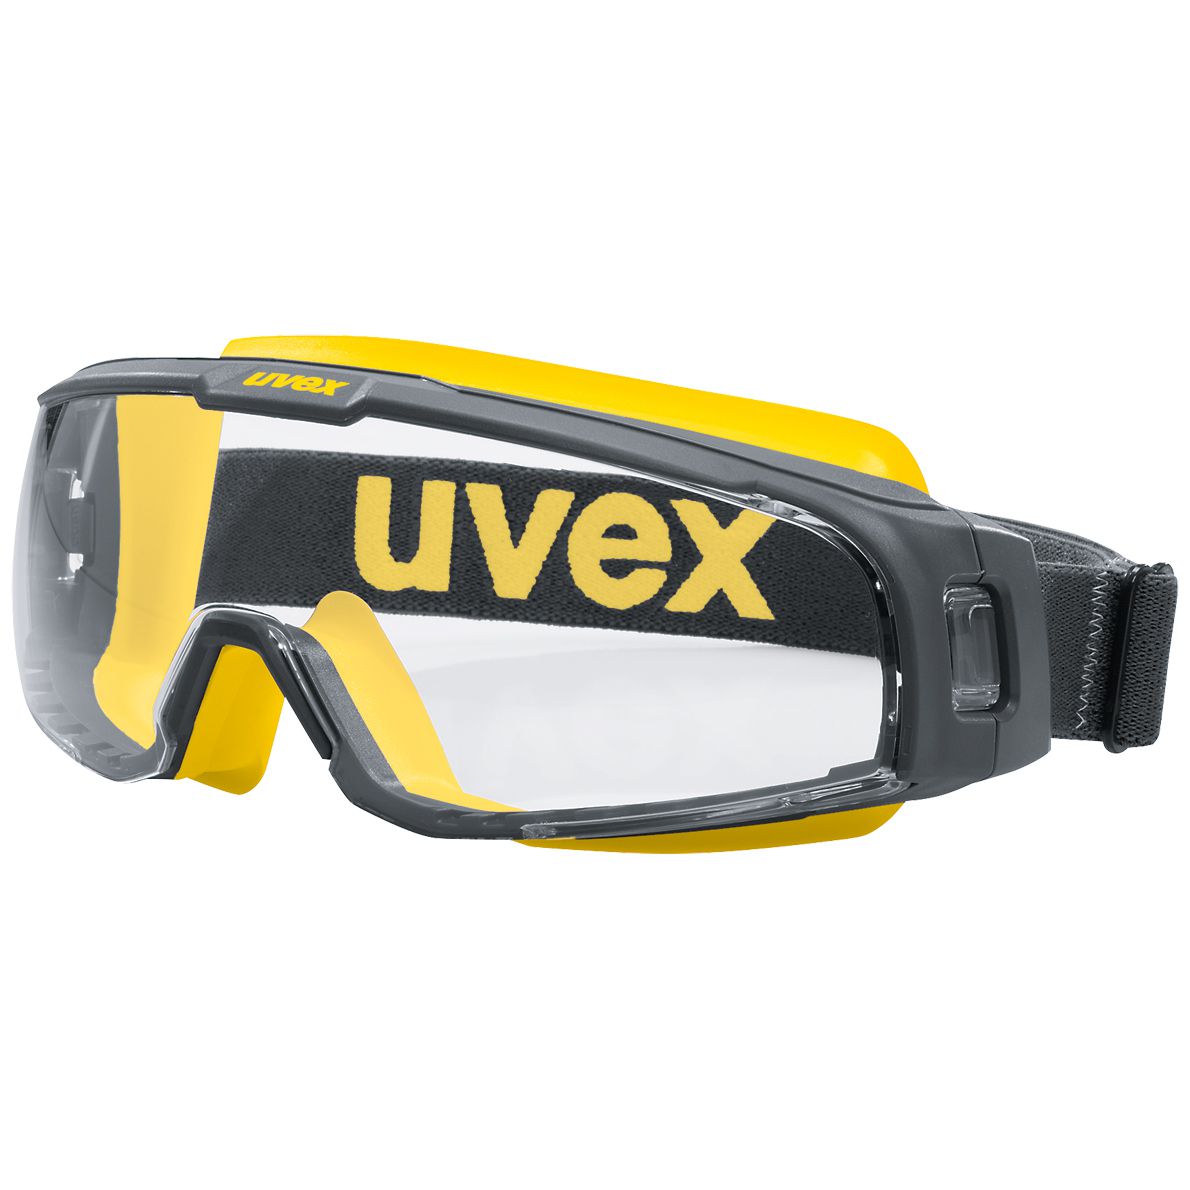 uvex u-sonic 9308 safety glasses - scratch & fog resistant thanks to supravision extreme - EN 166/170 - grey-yellow/clear